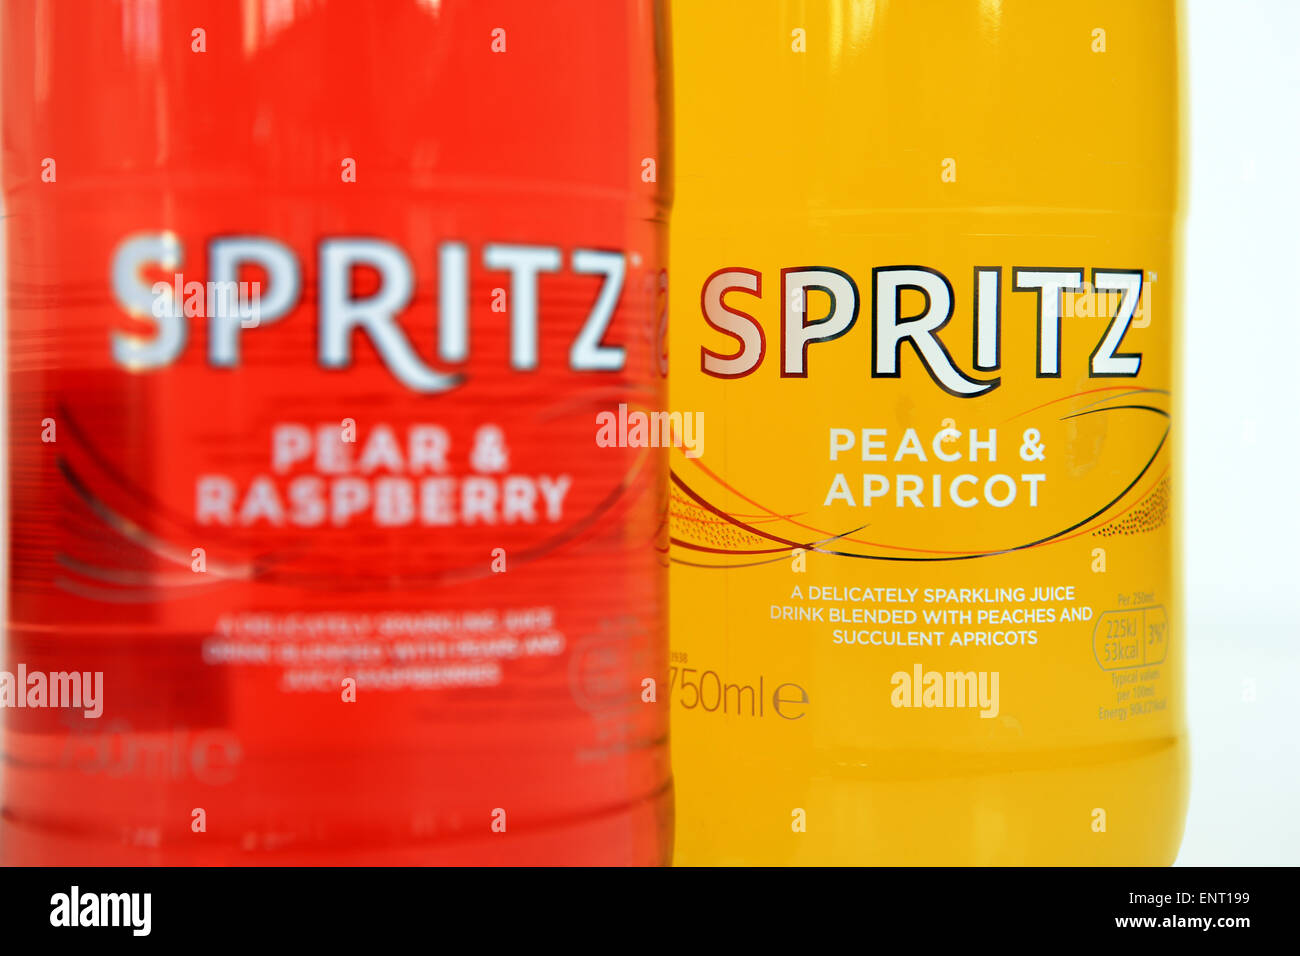 J20 Spritz - bottle of pear and raspberry and peach and apricot drinks Stock Photo